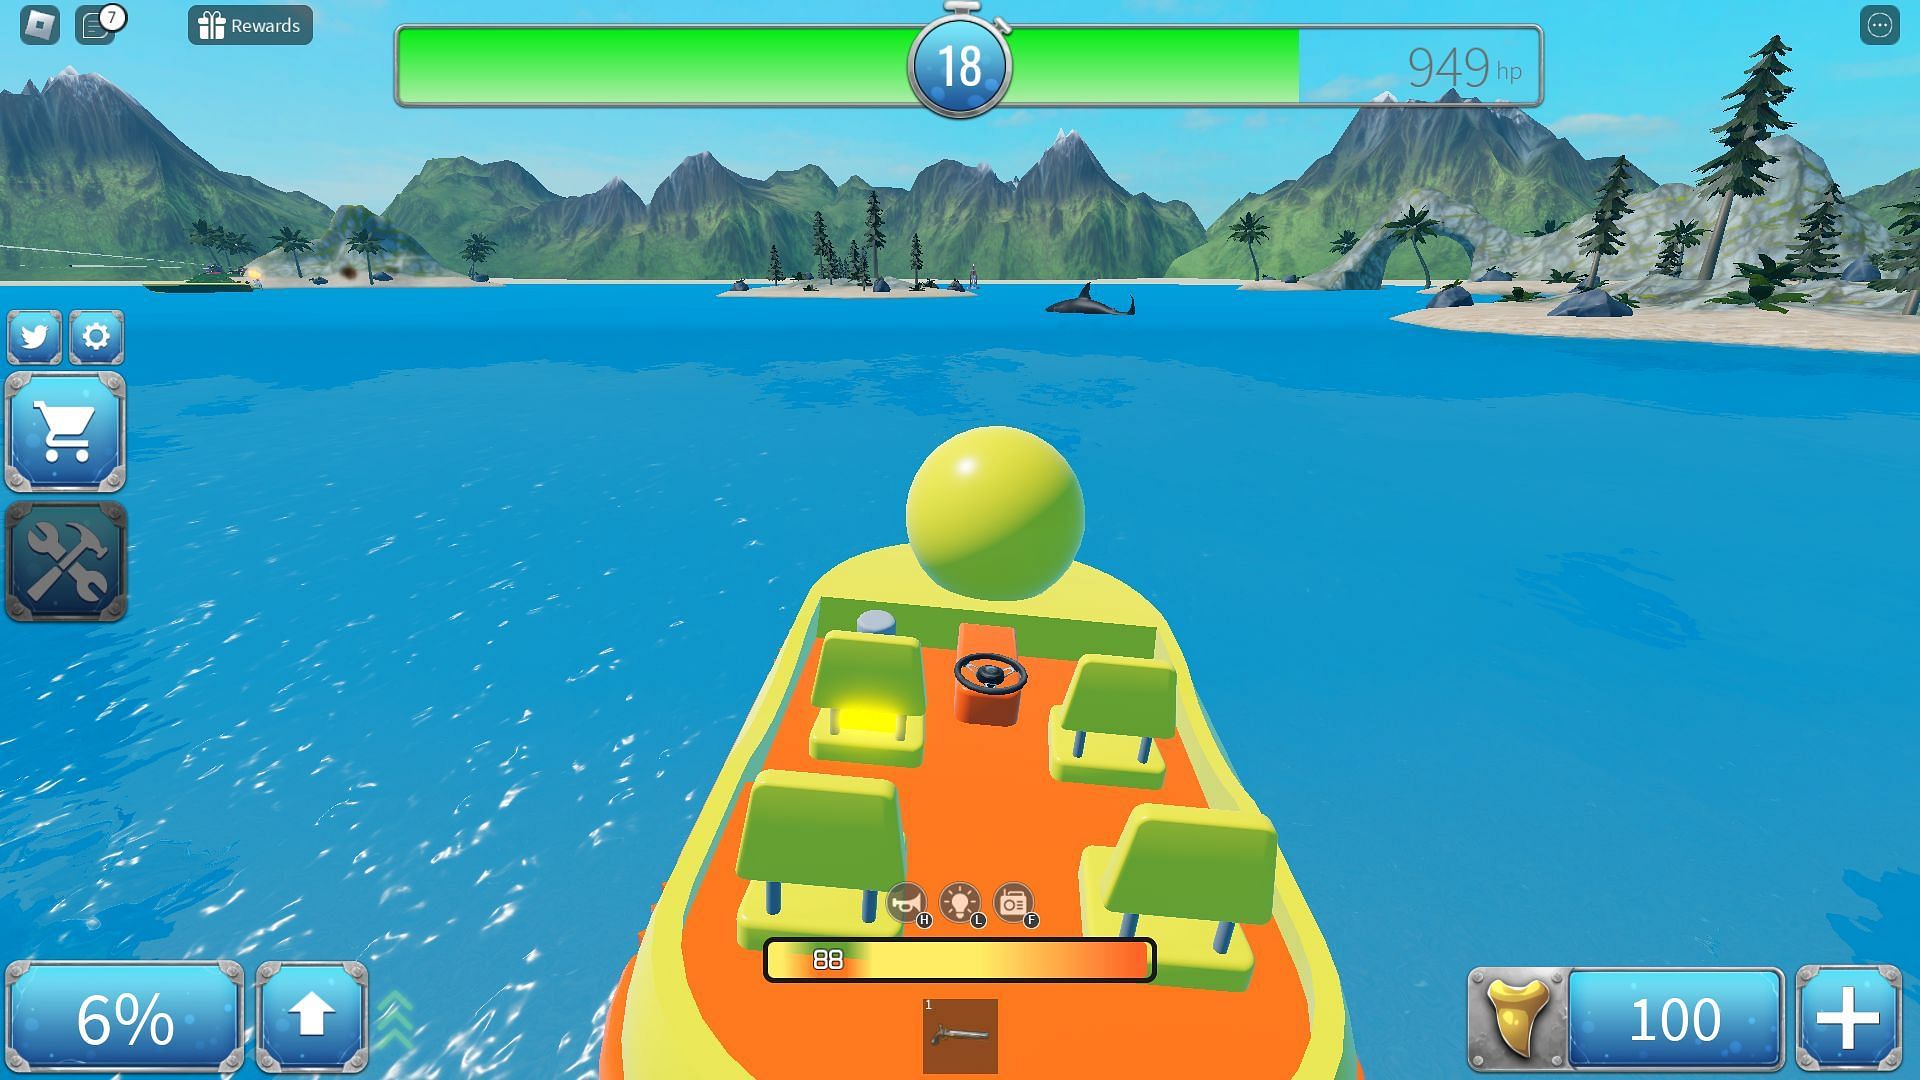 The ducky boat in action (Image via Roblox)